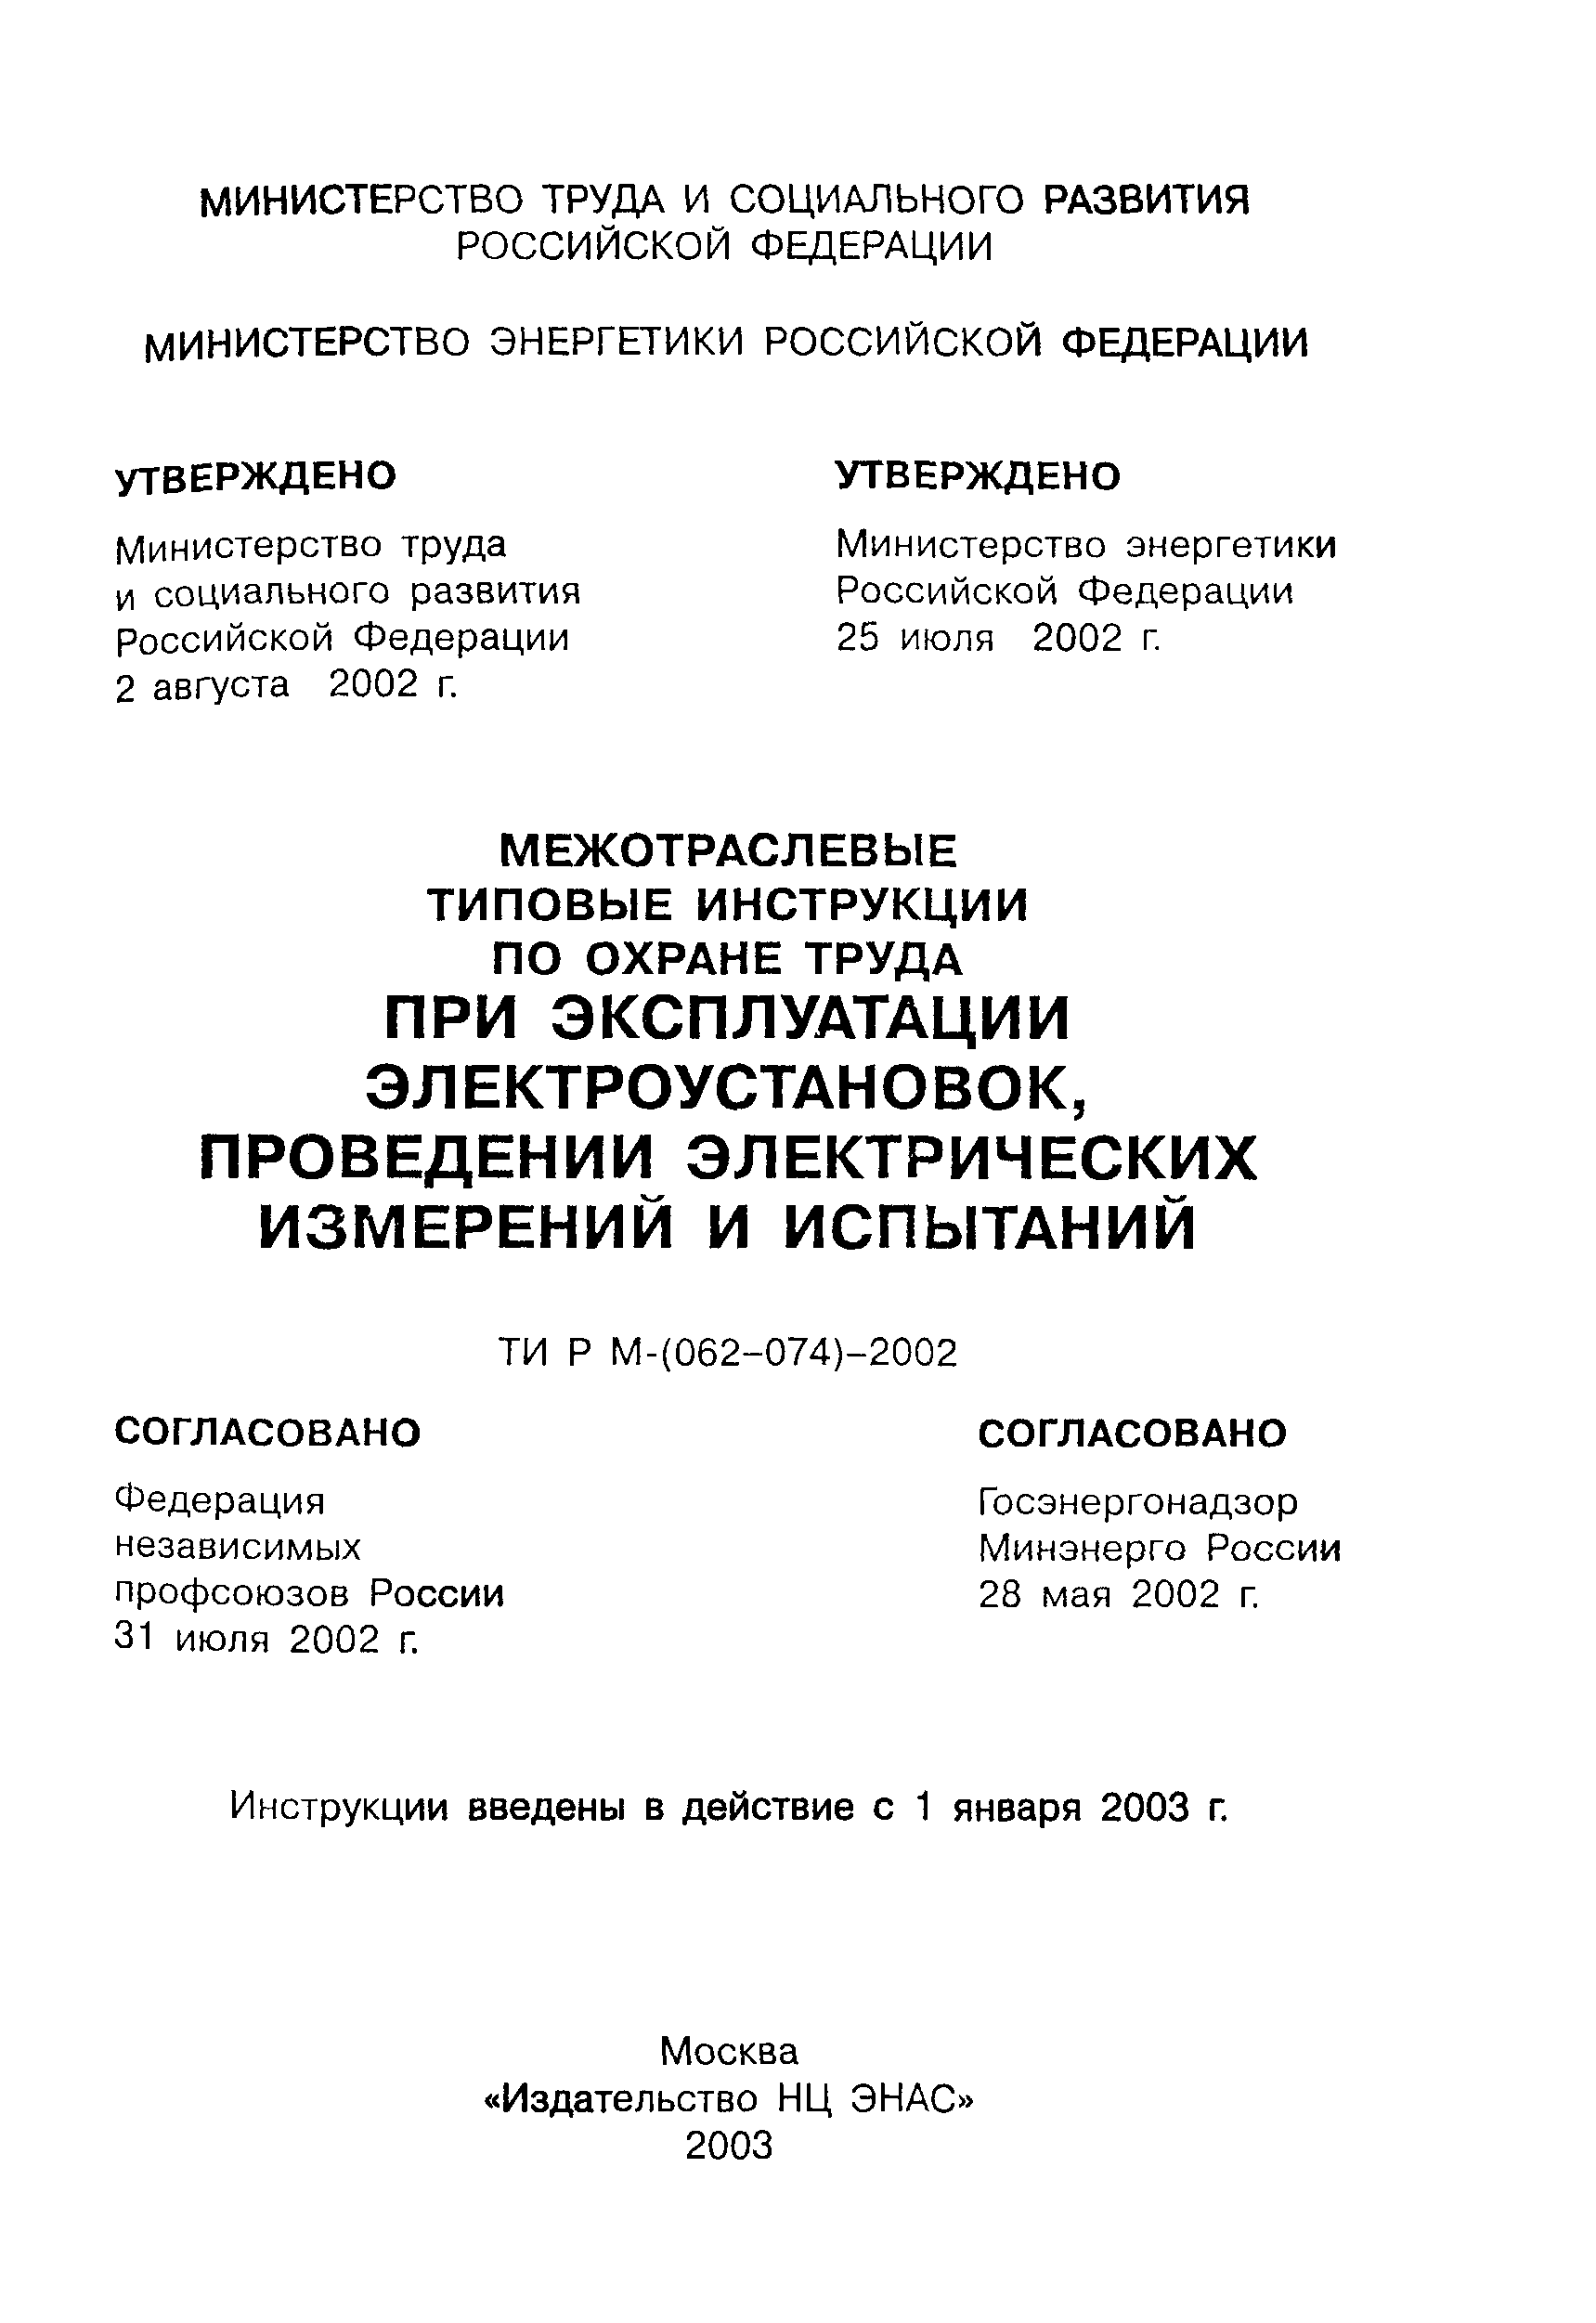 ТИ Р М-065-2002